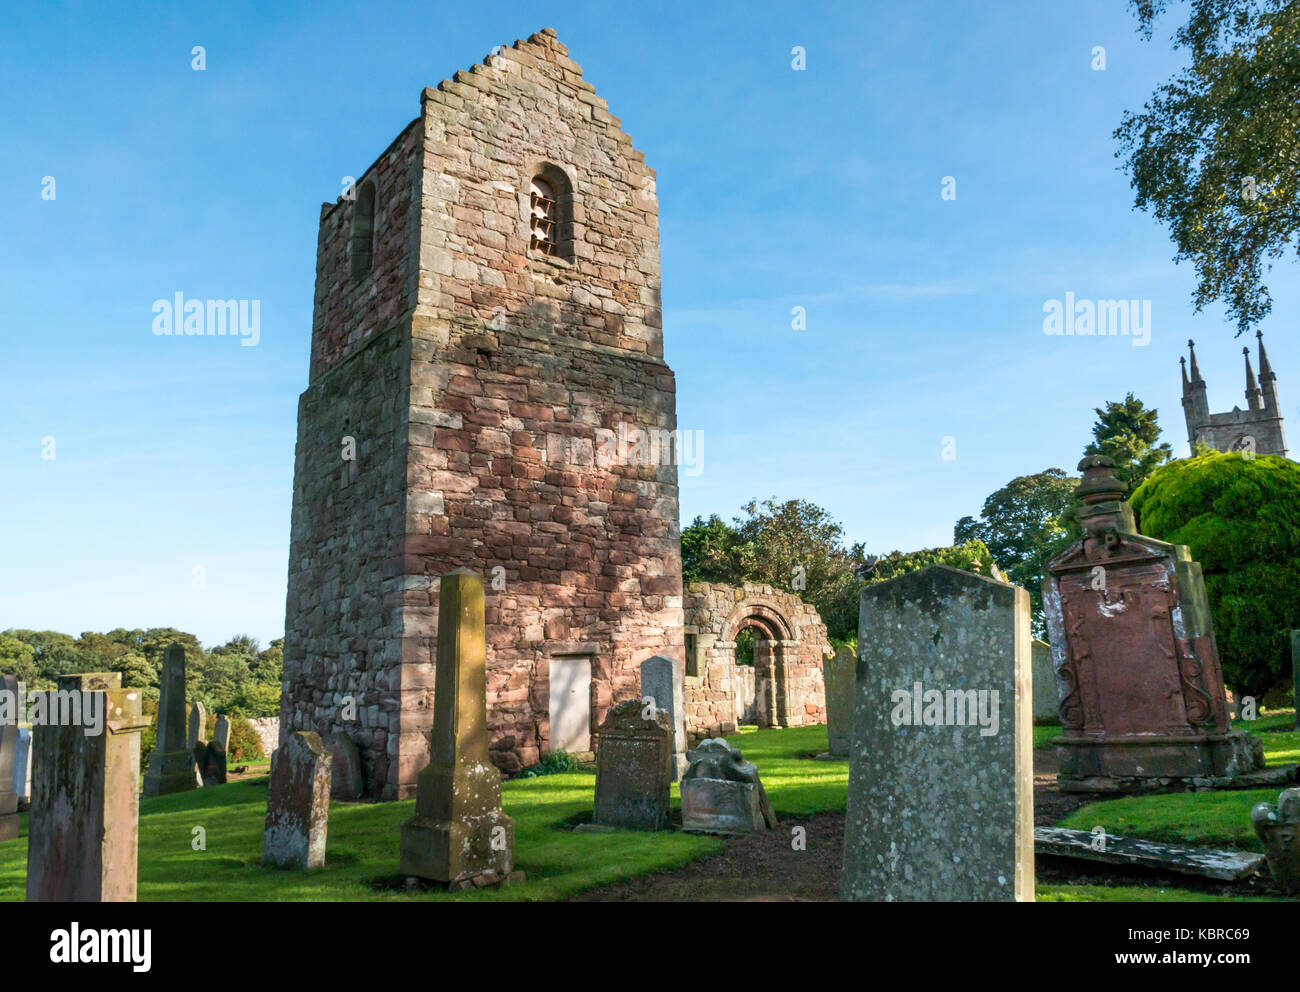 Old dovecote tower in old churchyard, Stenton Parish Church, East Lothian, Scotland, UK, with old gravestones Stock Photo